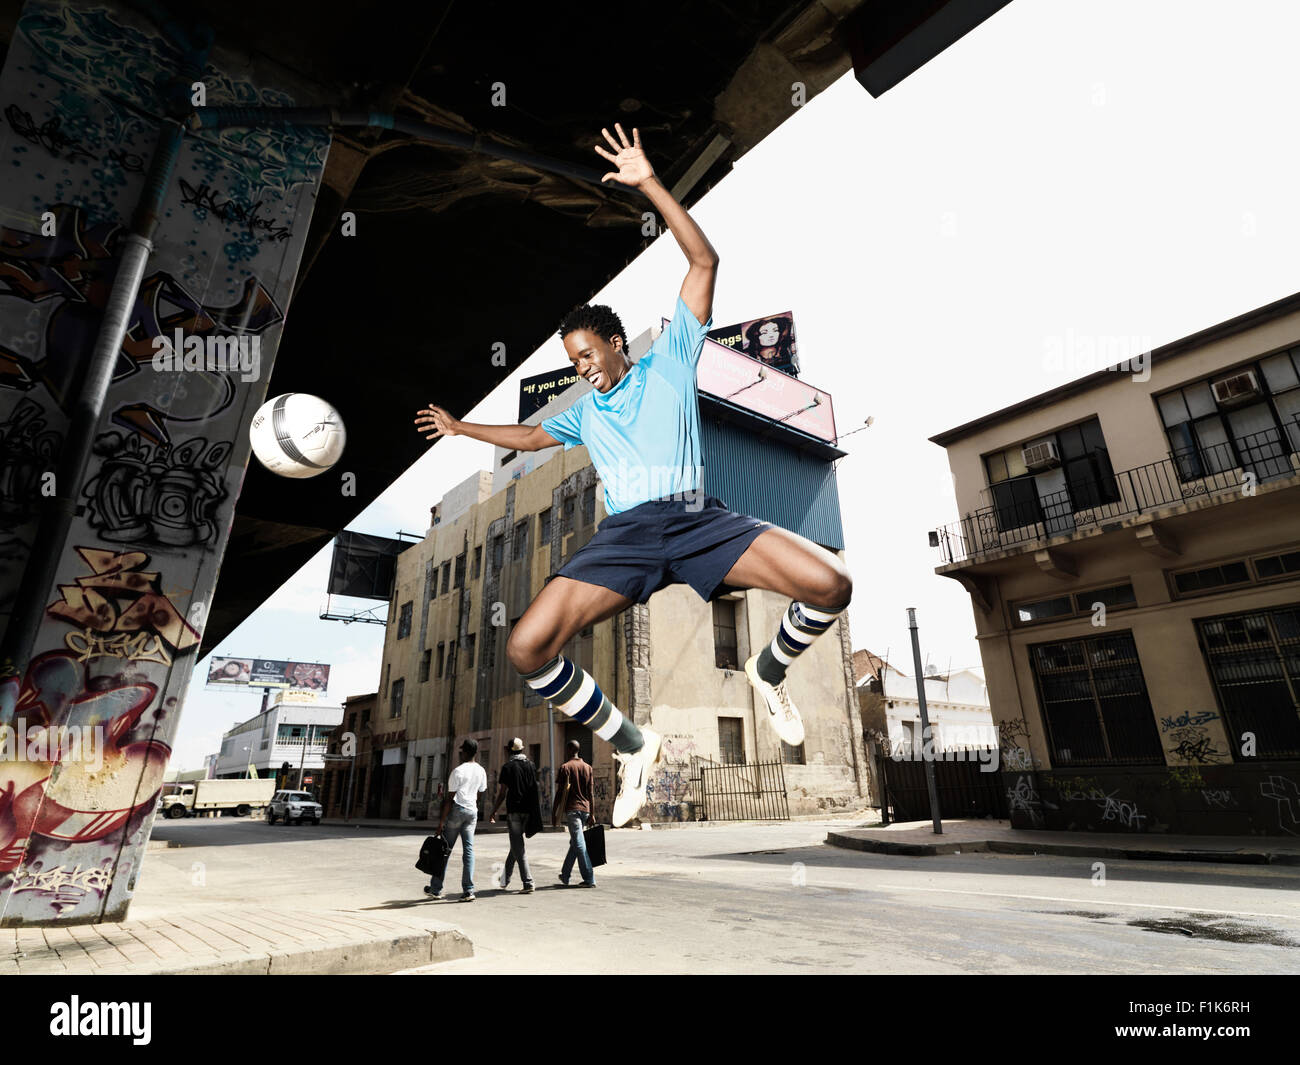 Black man jumping with soccer ball, city scene with people walking in the background Stock Photo